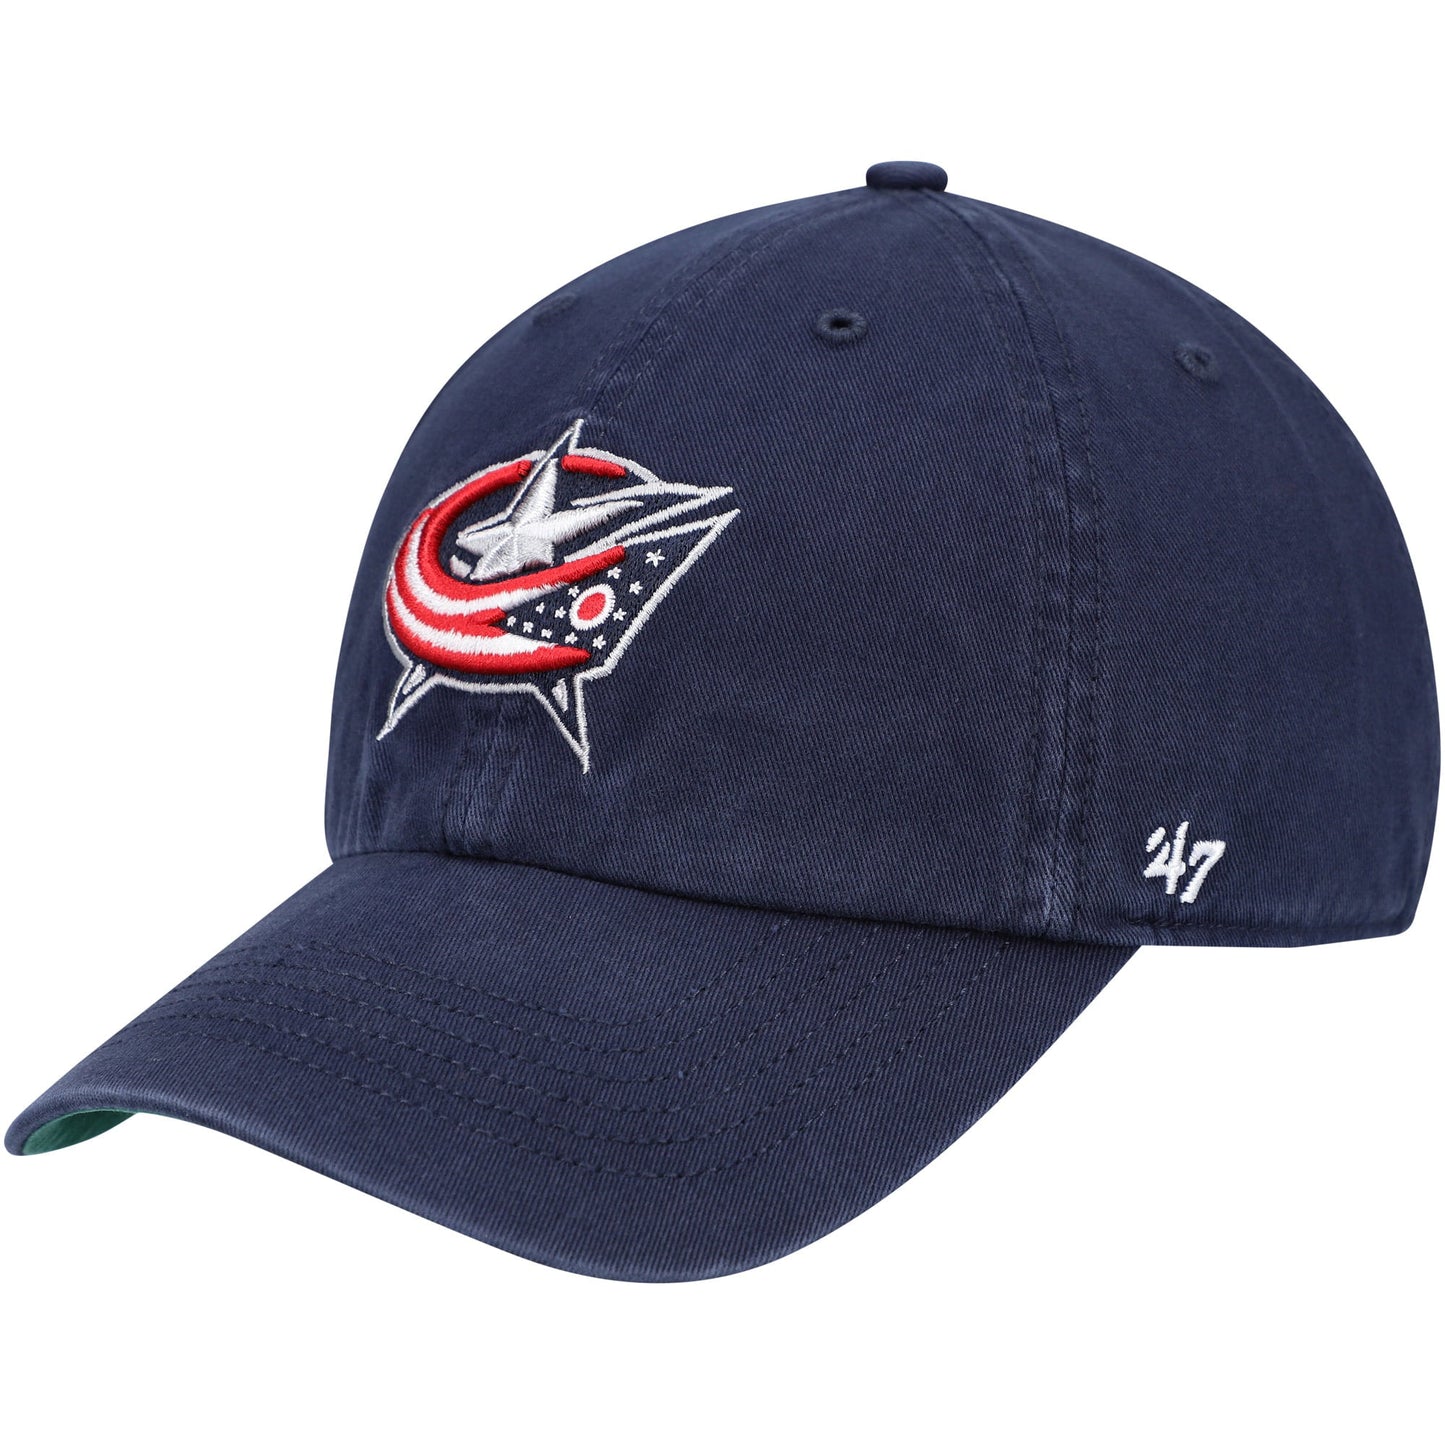 Men's '47 Navy Columbus Blue Jackets Team Franchise Fitted Hat